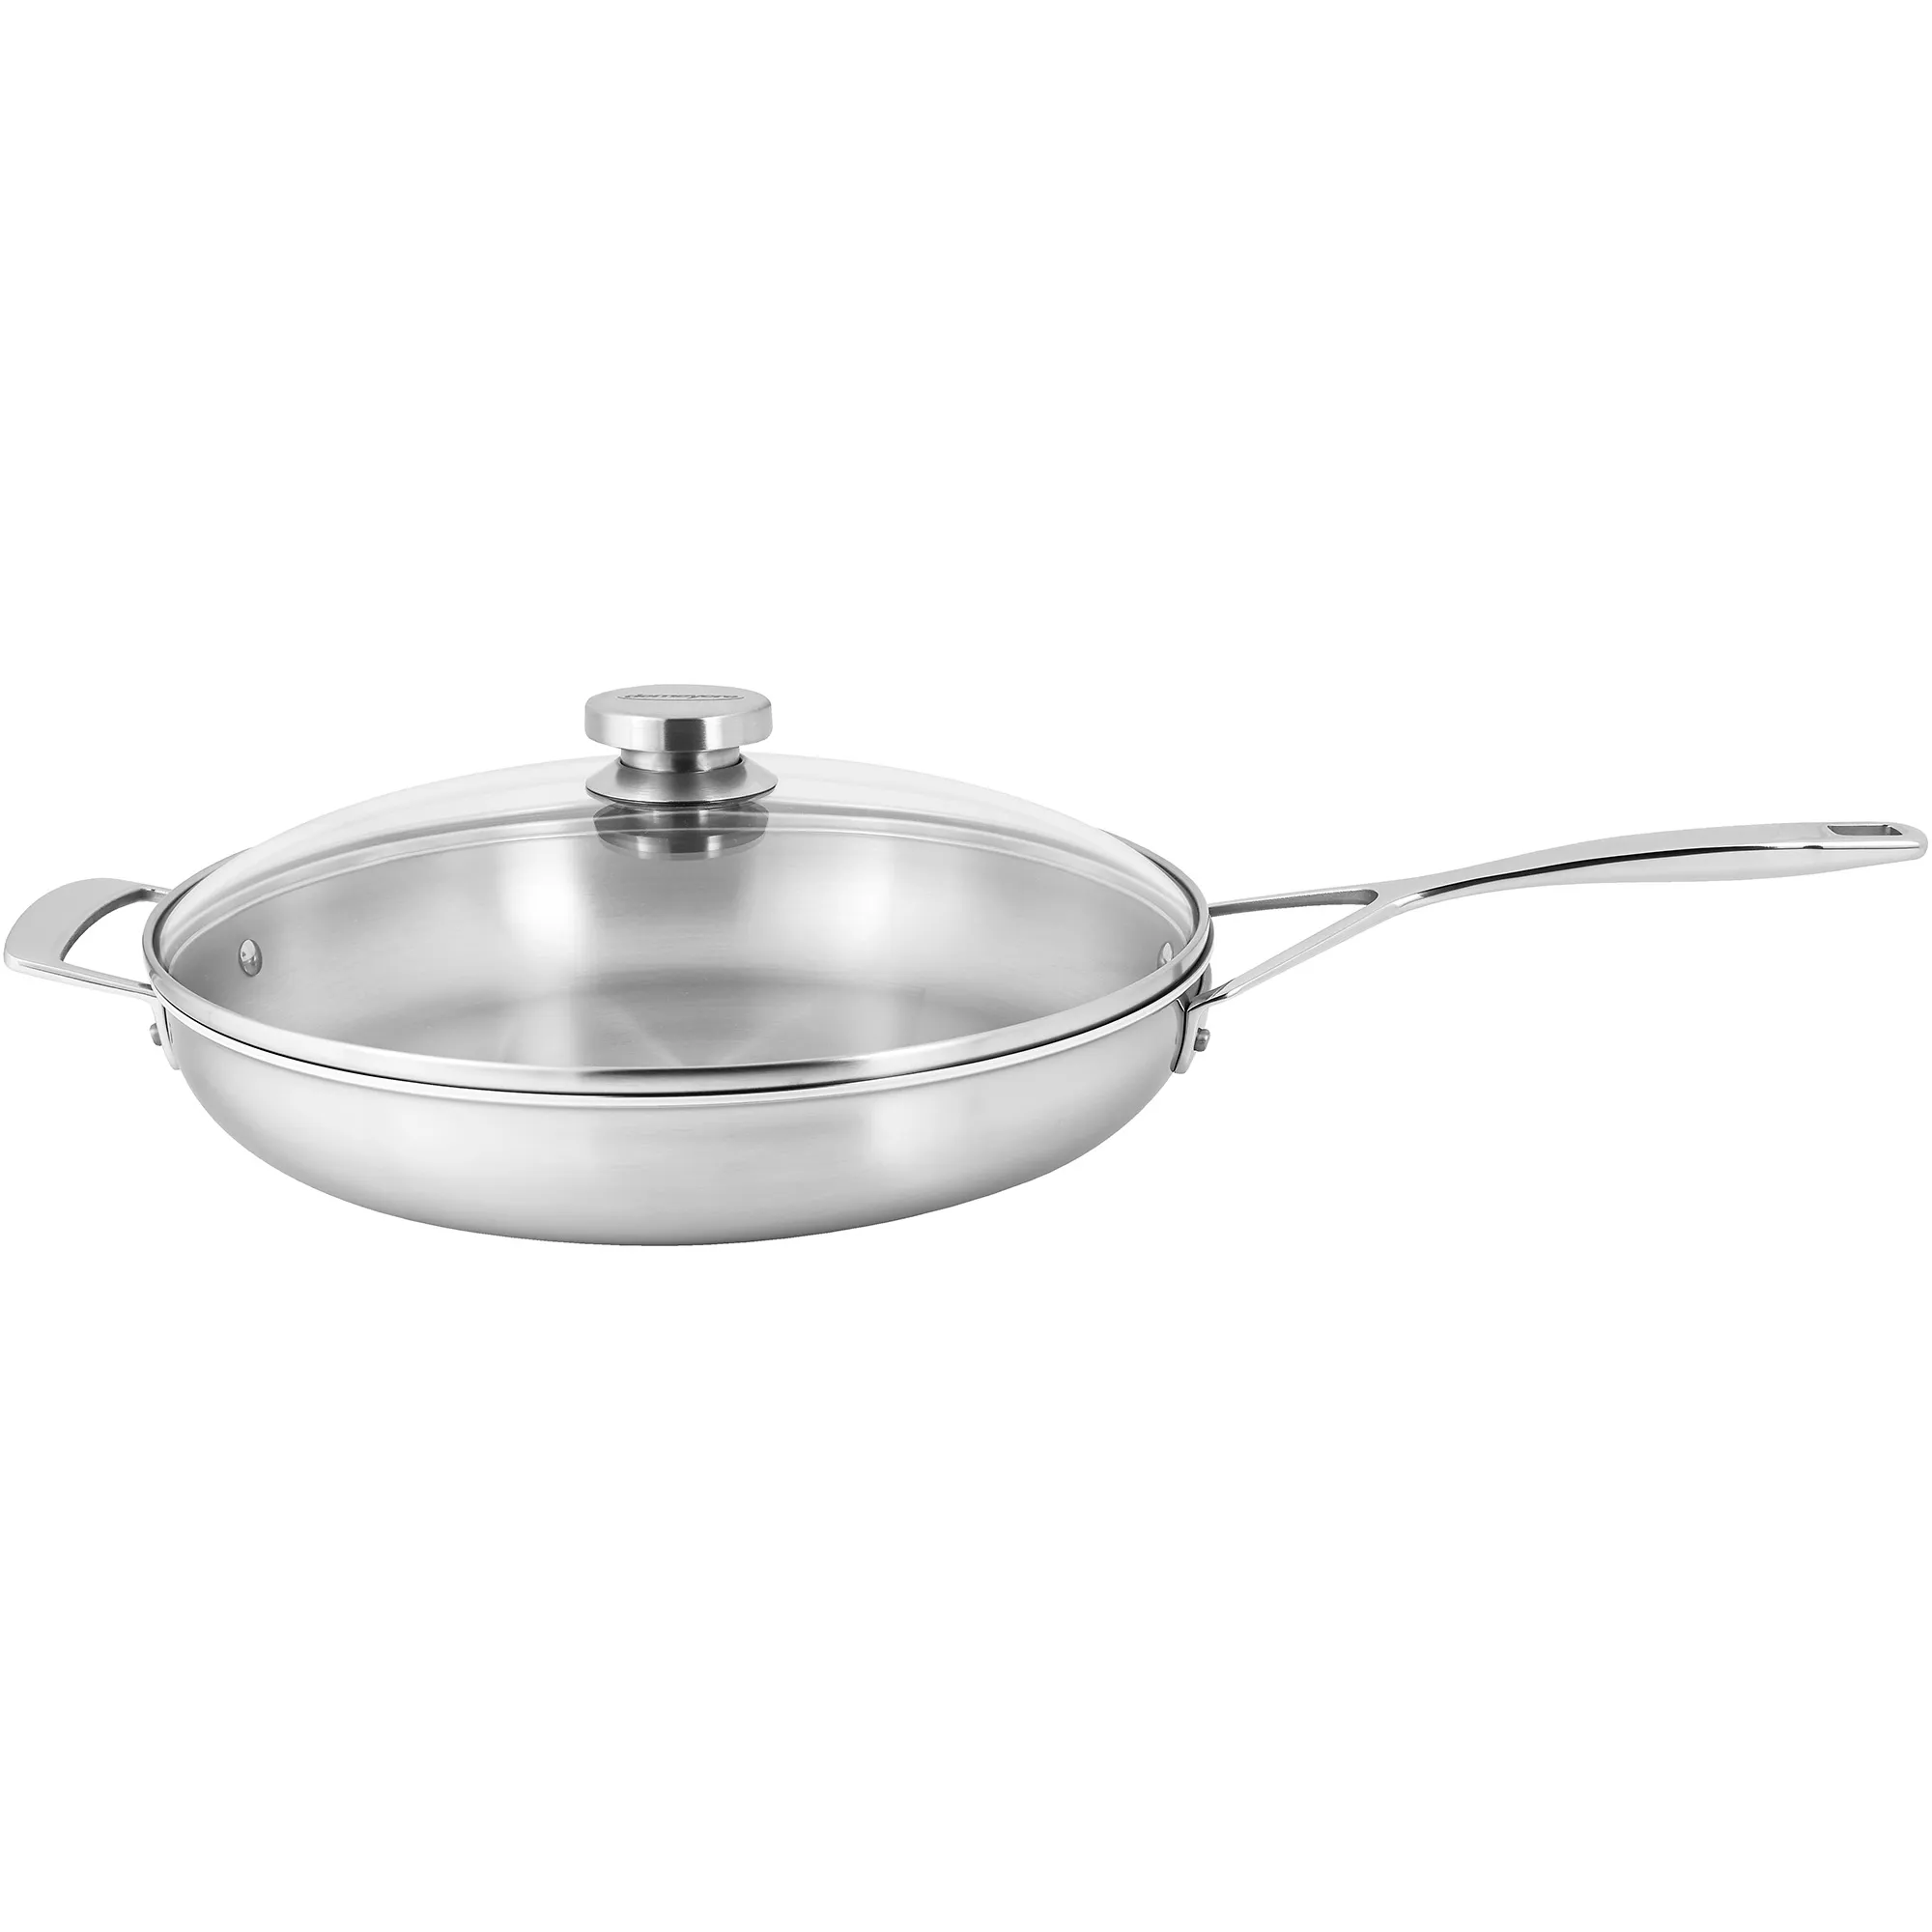 Stainless Steel Wok - 12.5-Inch